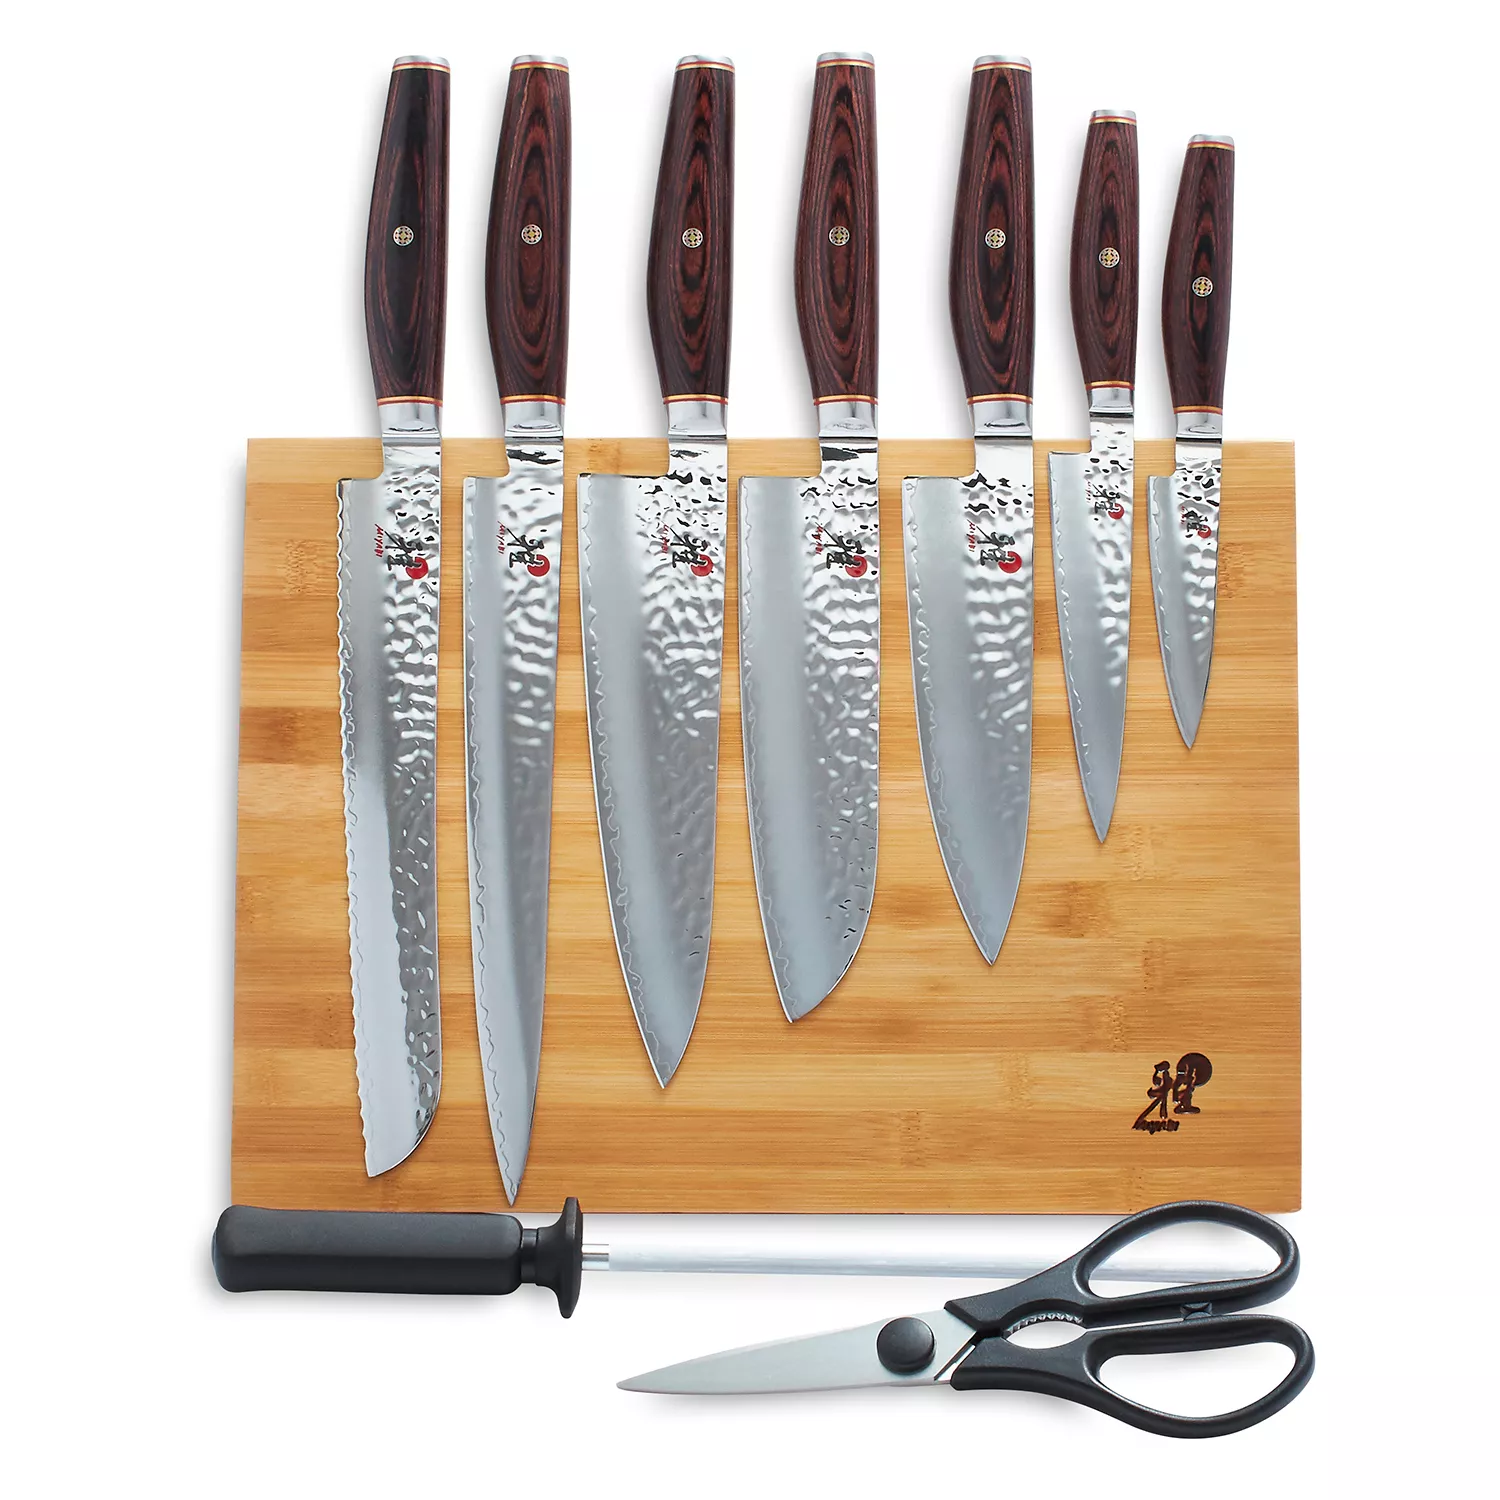 Cyber Monday 2020: This Cuisinart Knife Set is on Sale